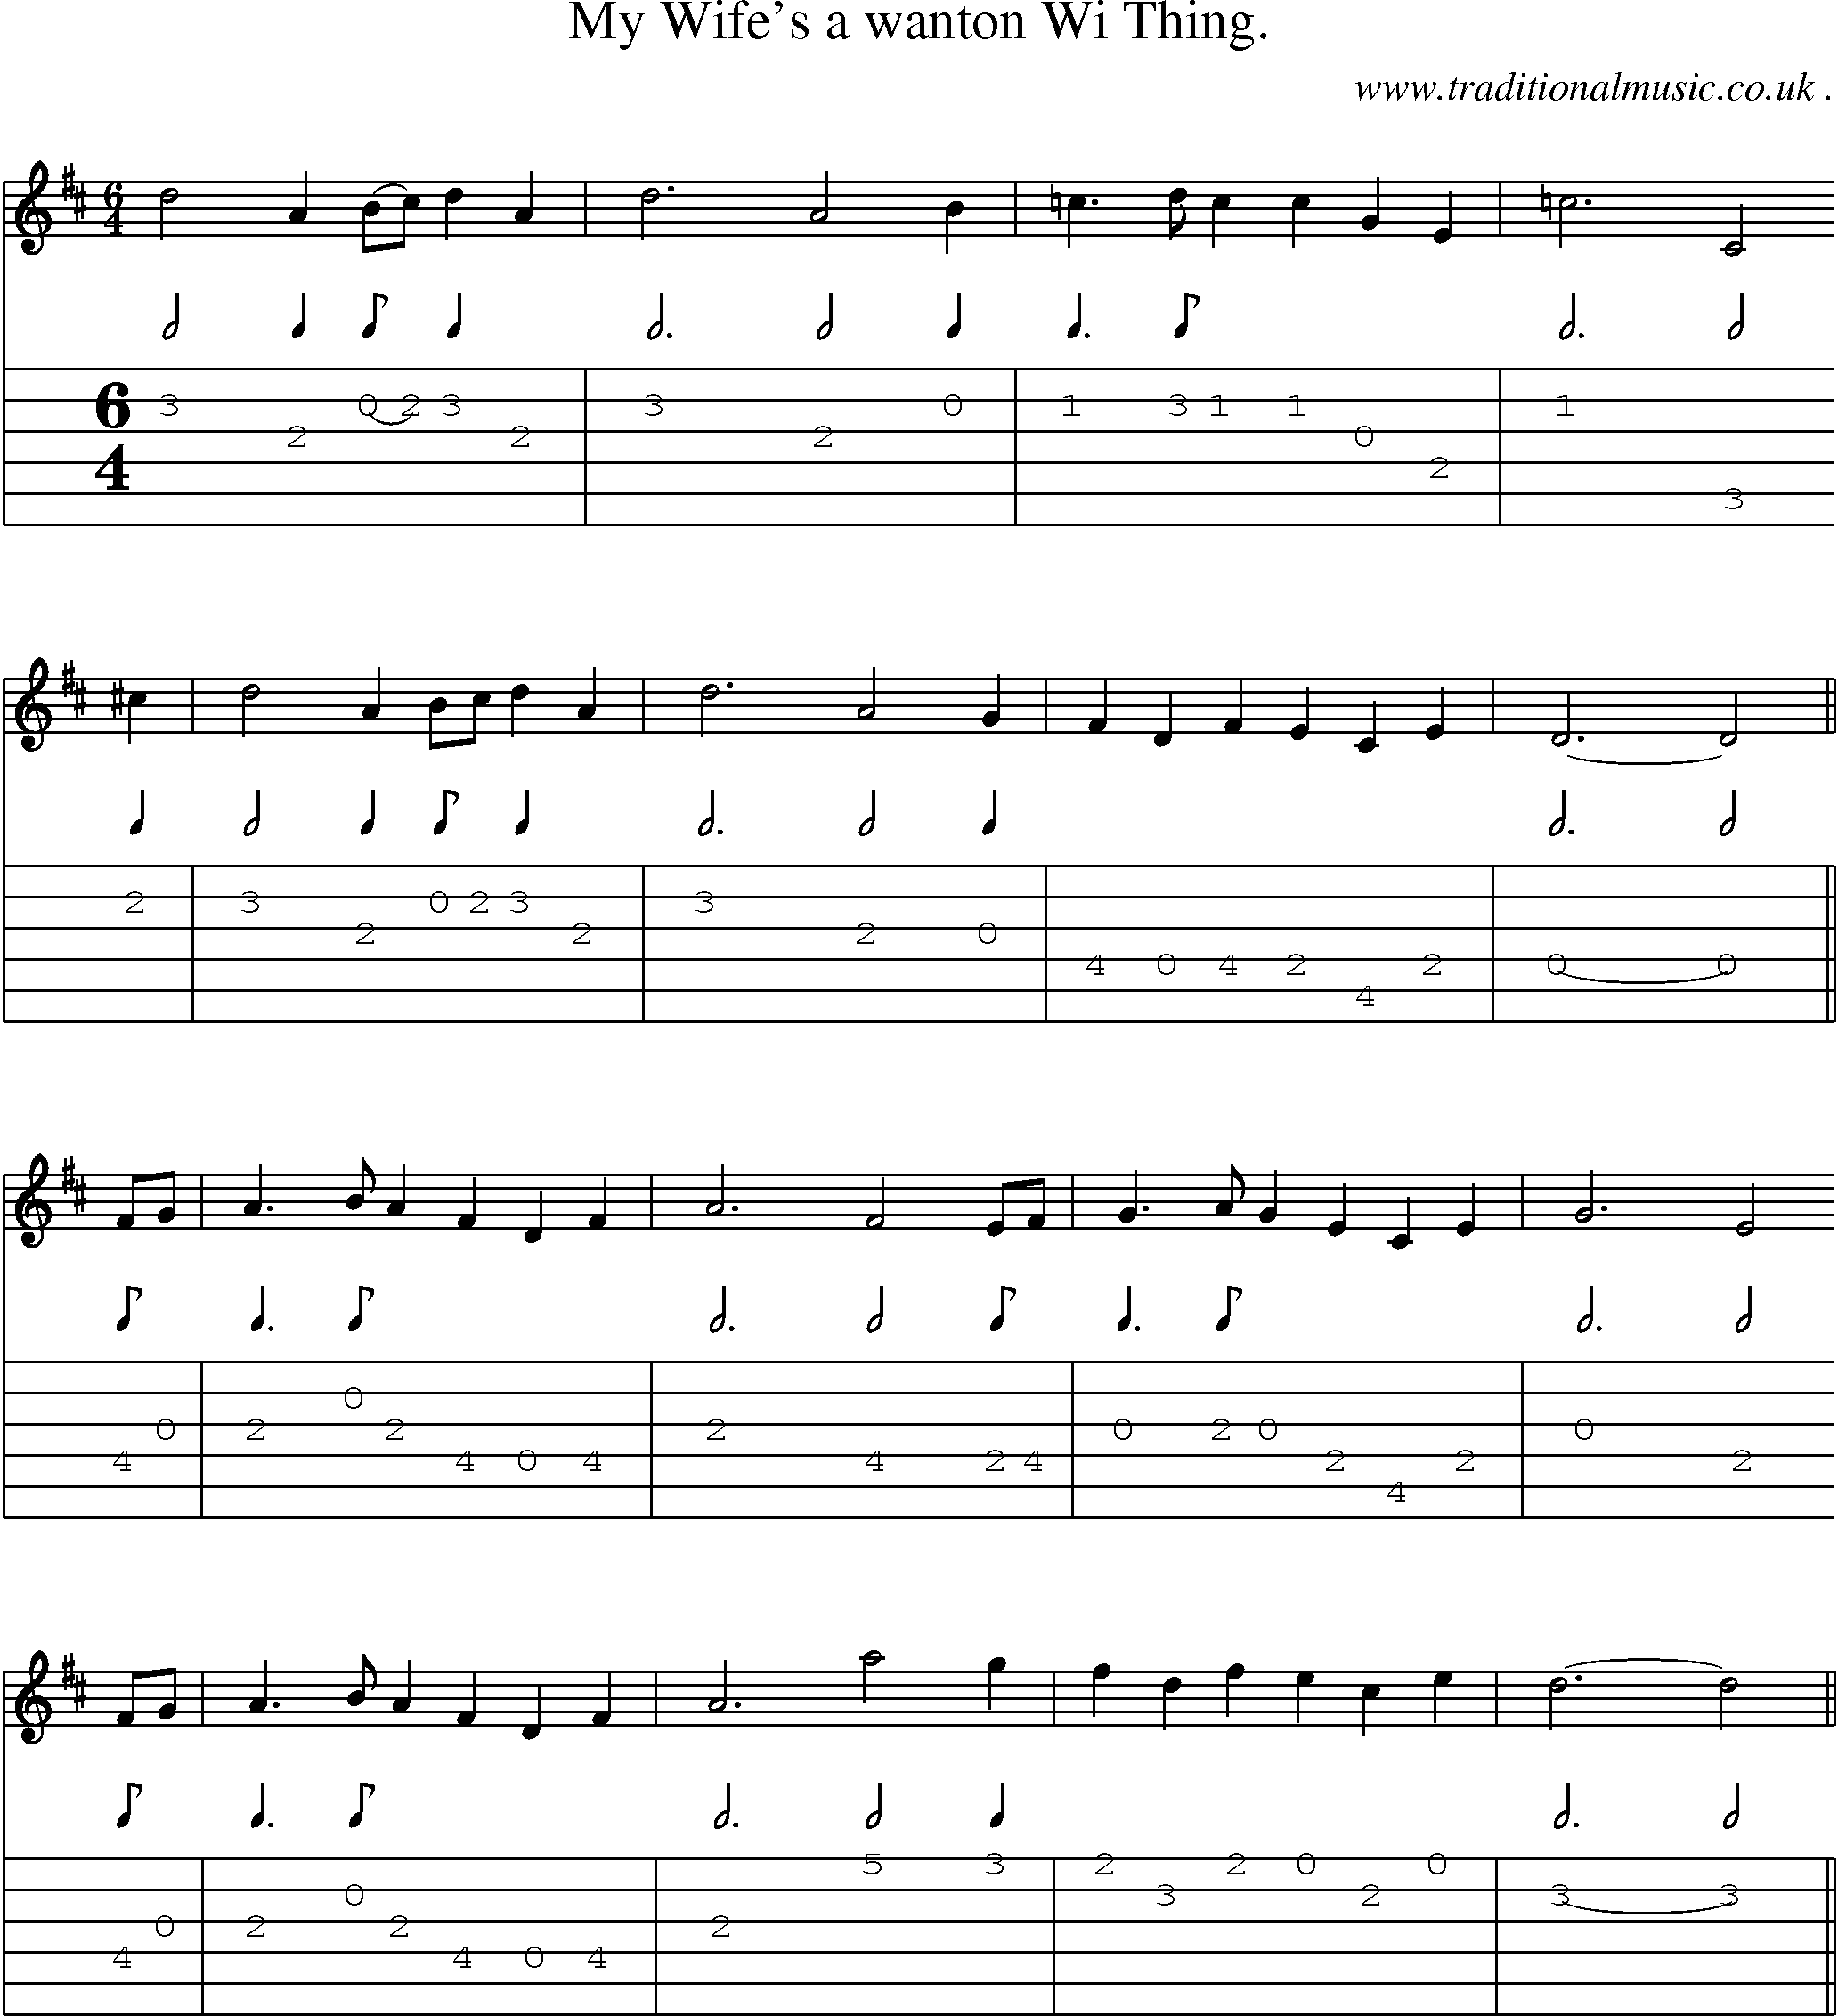 Sheet-Music and Guitar Tabs for My Wifes A Wanton Wi Thing